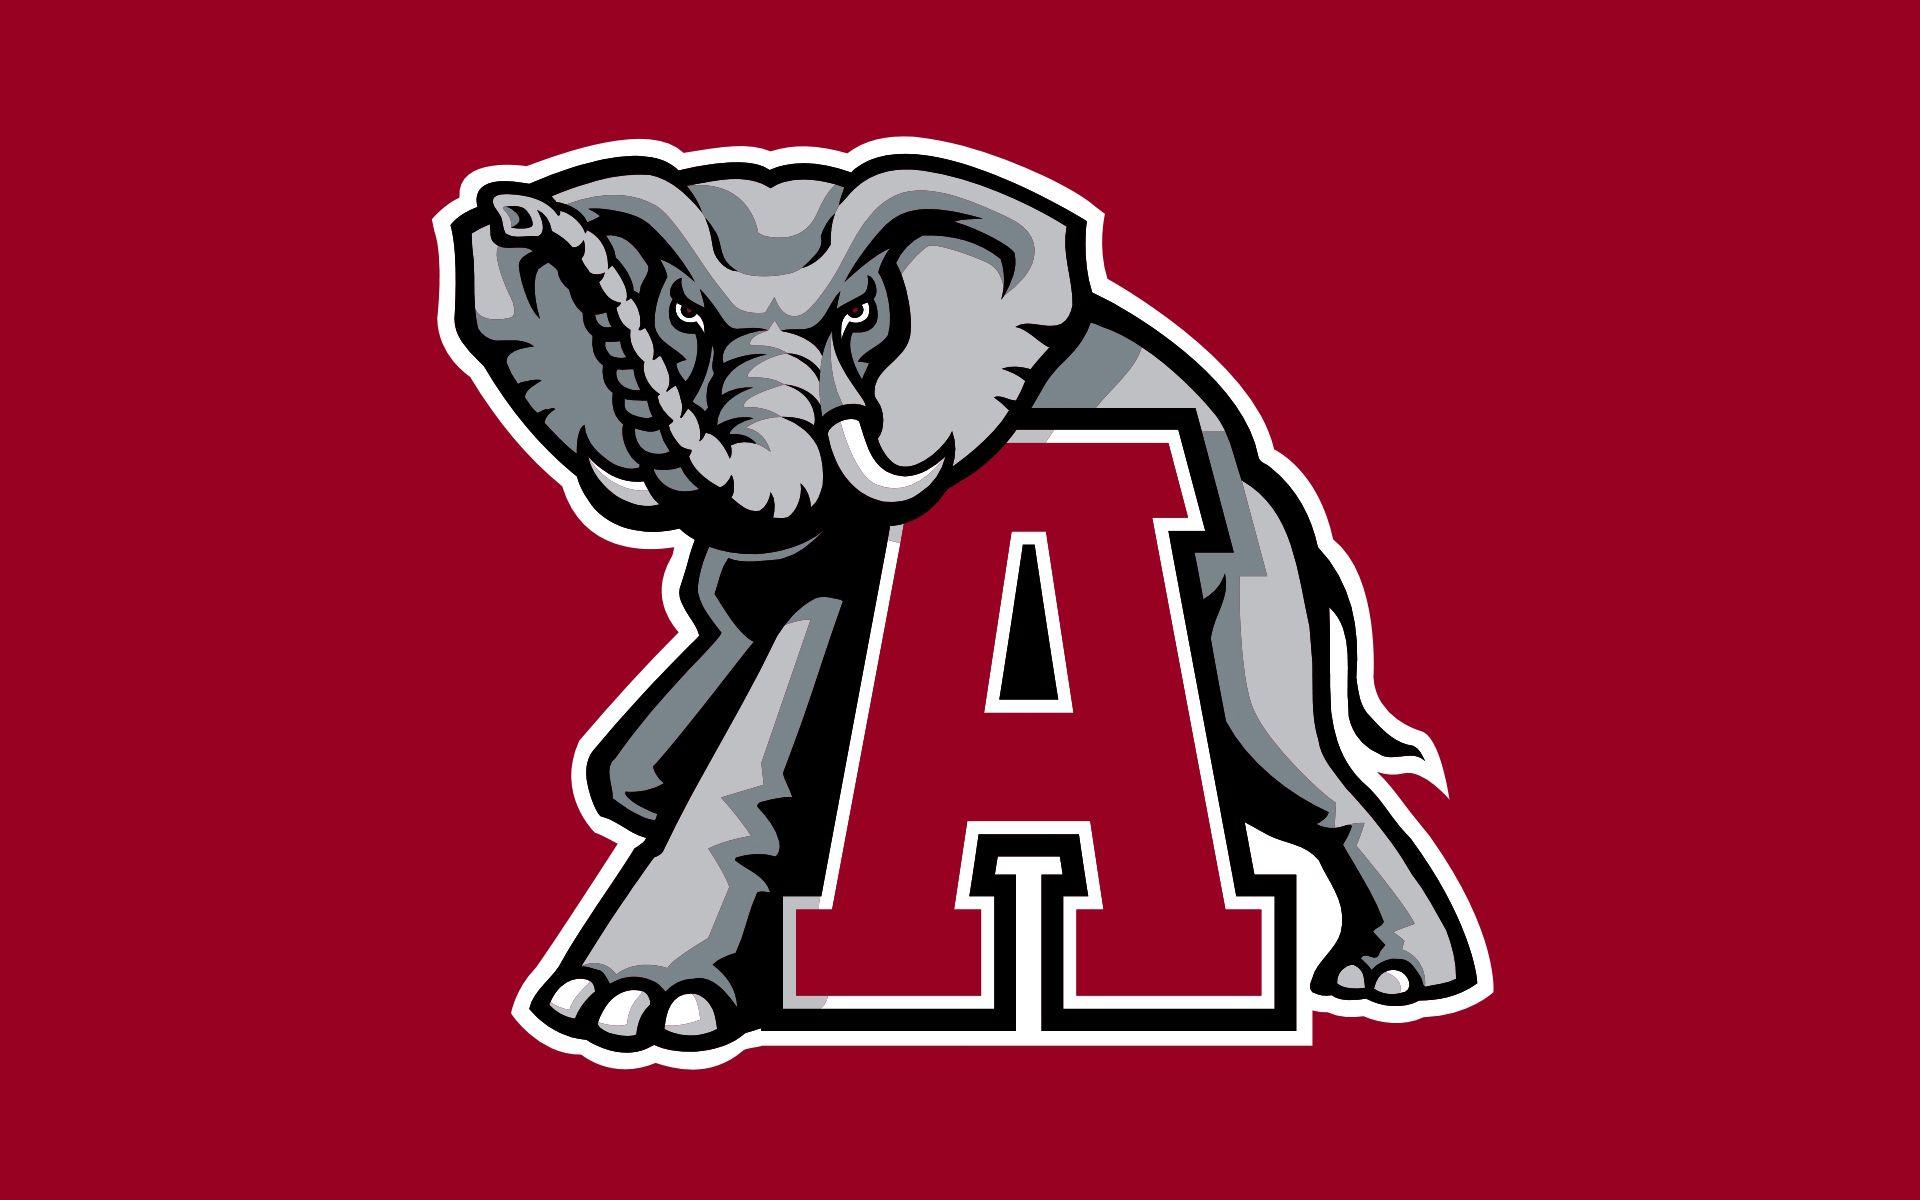 Awesome Elephant Alabama Football Logo Wallpapers in High Quality